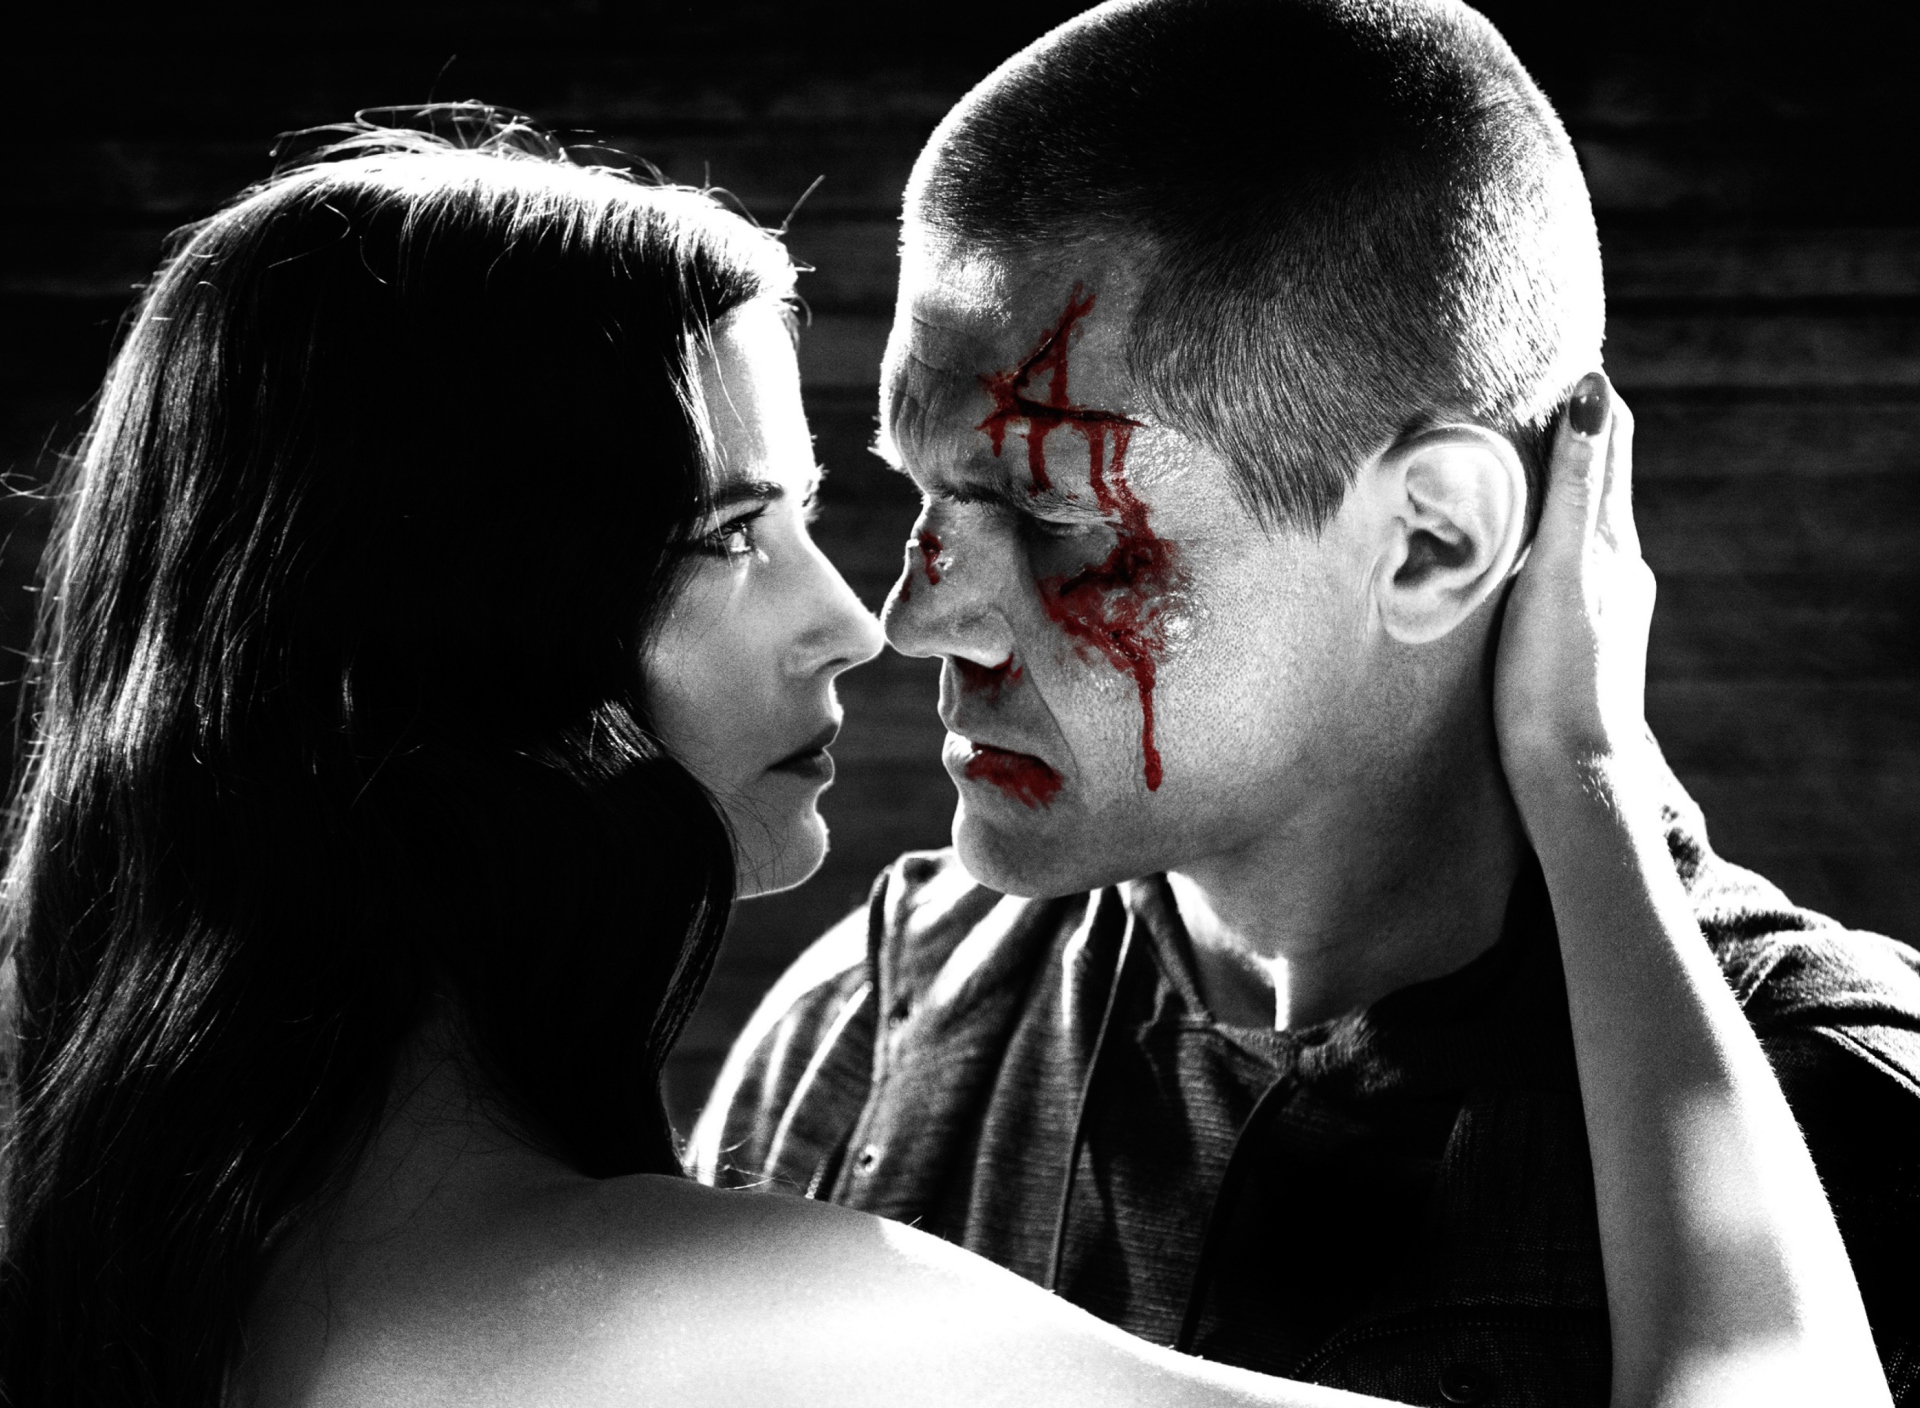 Sin City A Dame To Kill For screenshot #1 1920x1408